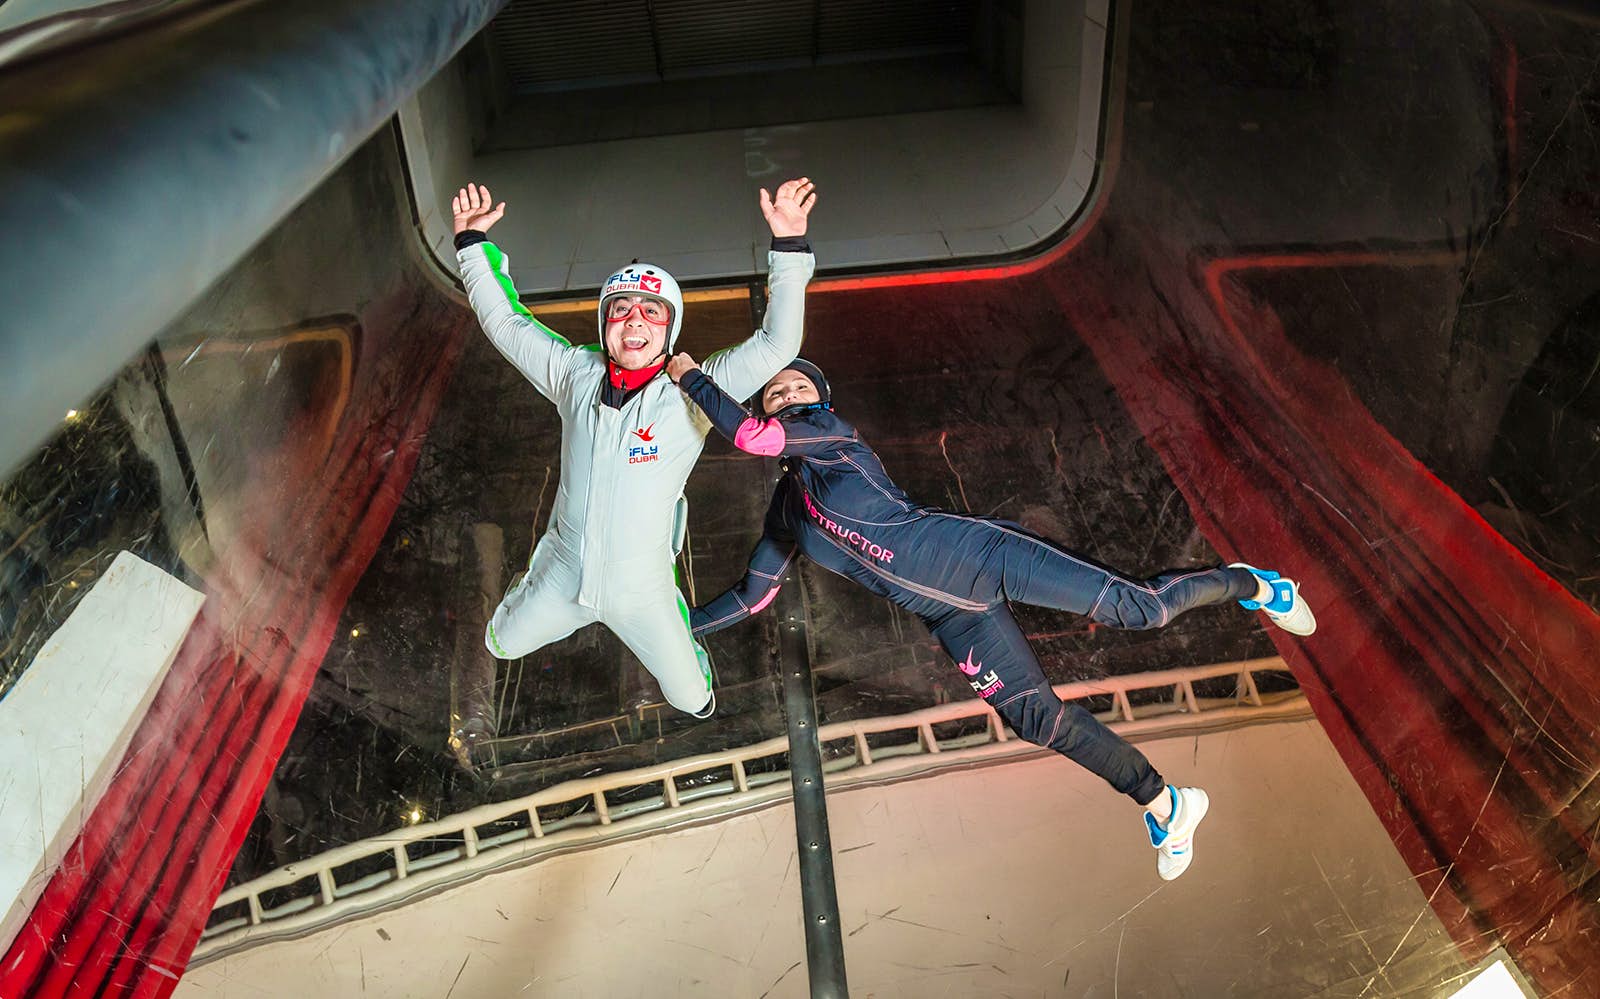 Experience the enthralling indoor skydiving 